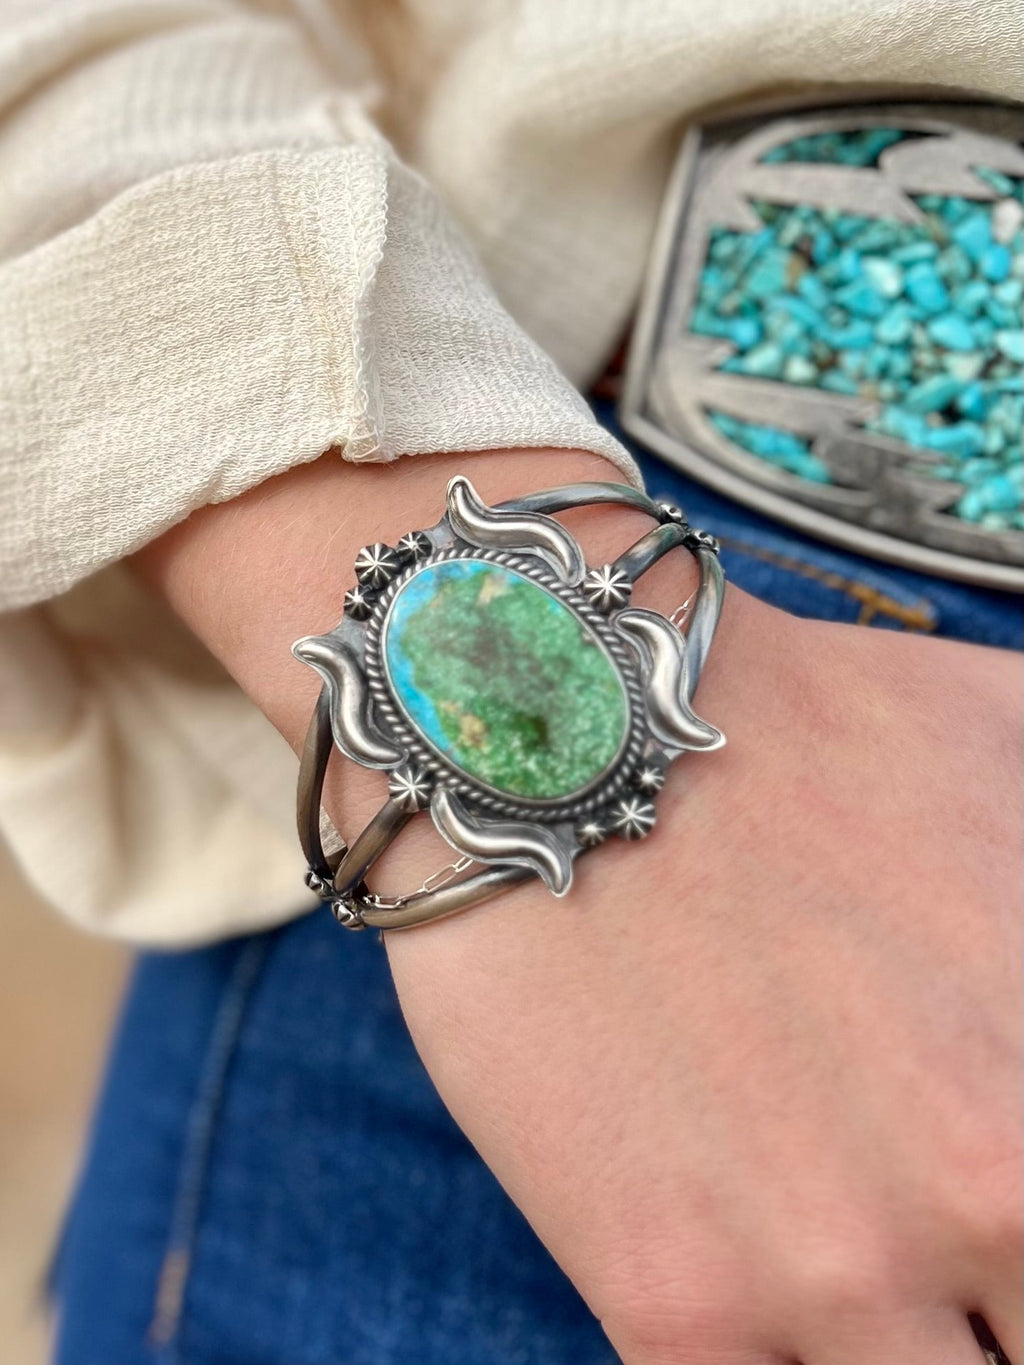 Your Majesty Turquoise Sterling Silver Navajo Cuff Bracelet | gussieduponline